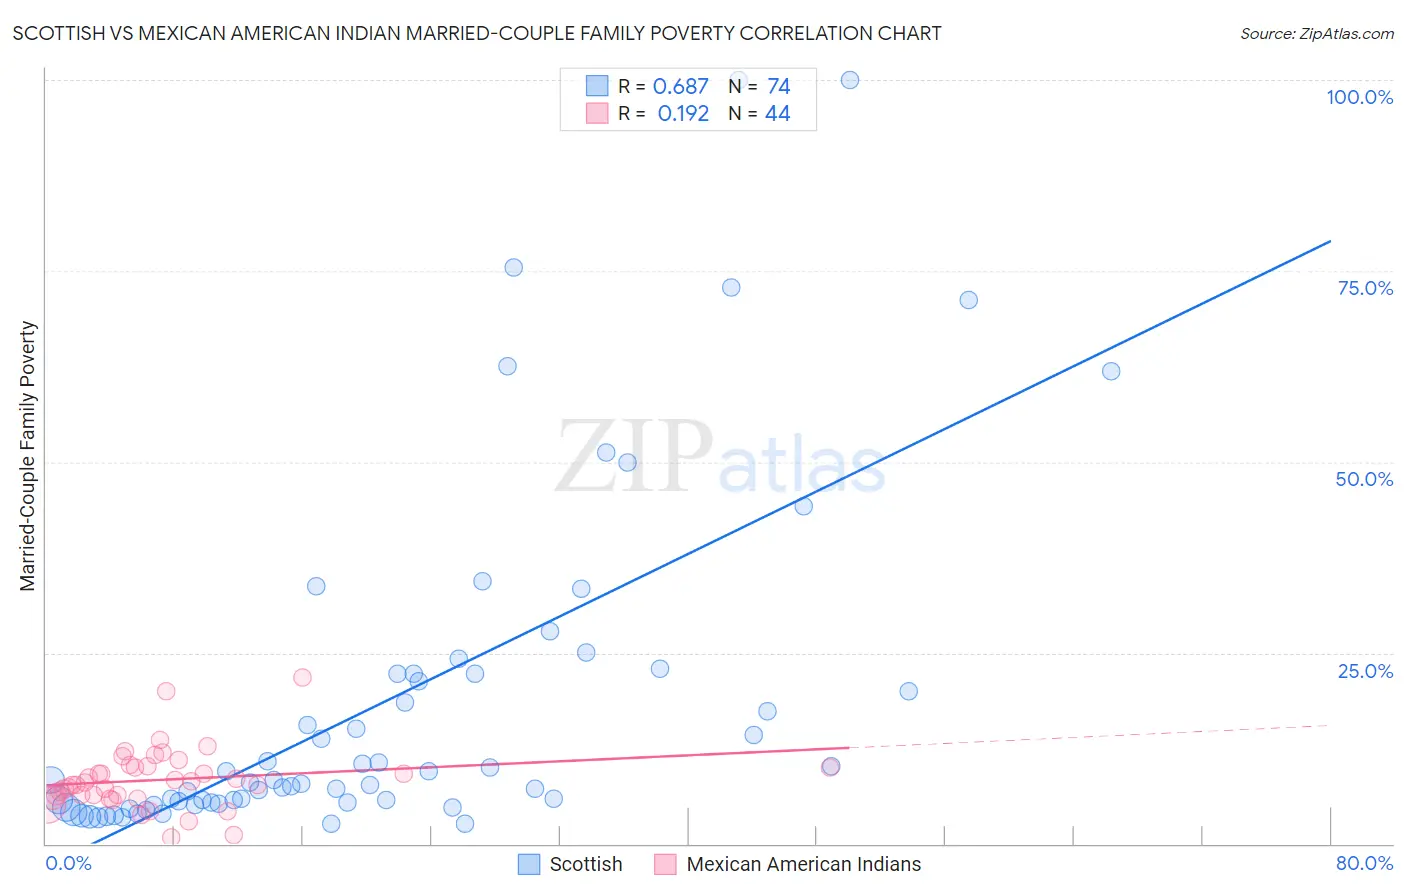 Scottish vs Mexican American Indian Married-Couple Family Poverty